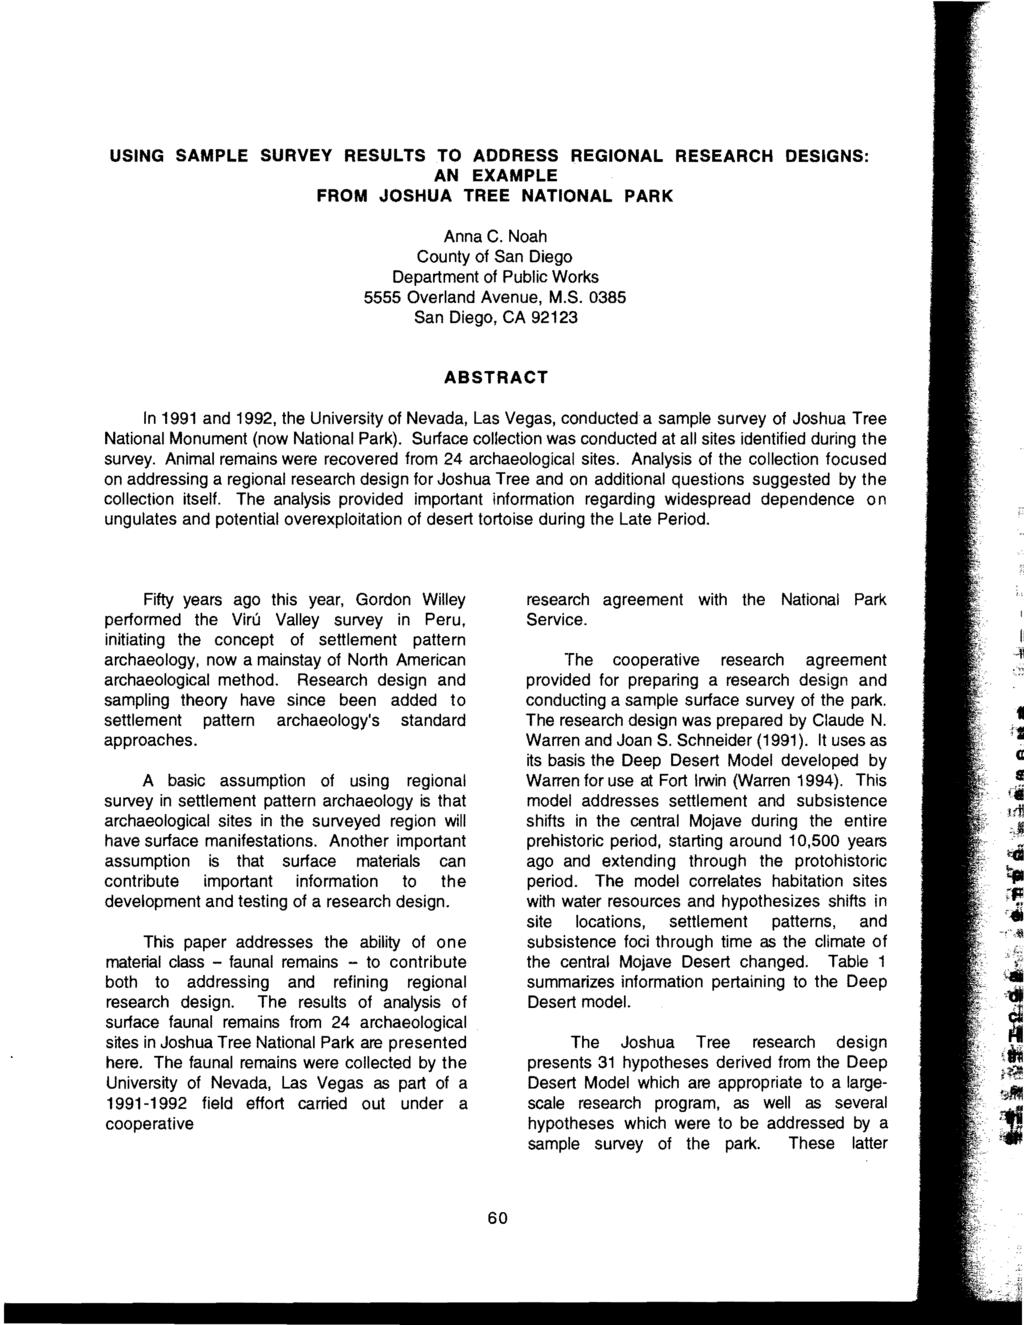 USING SAMPLE SURVEY RESULTS TO ADDRESS REGIONAL RESEARCH DESIGNS: AN EXAMPLE FROM JOSHUA TREE NATIONAL PARK Anna C. Noah County of San Diego Department of Public Works 5555 Overland Avenue, M.S. 0385 San Diego, CA 92123 ABSTRACT In 1991 and 1992.